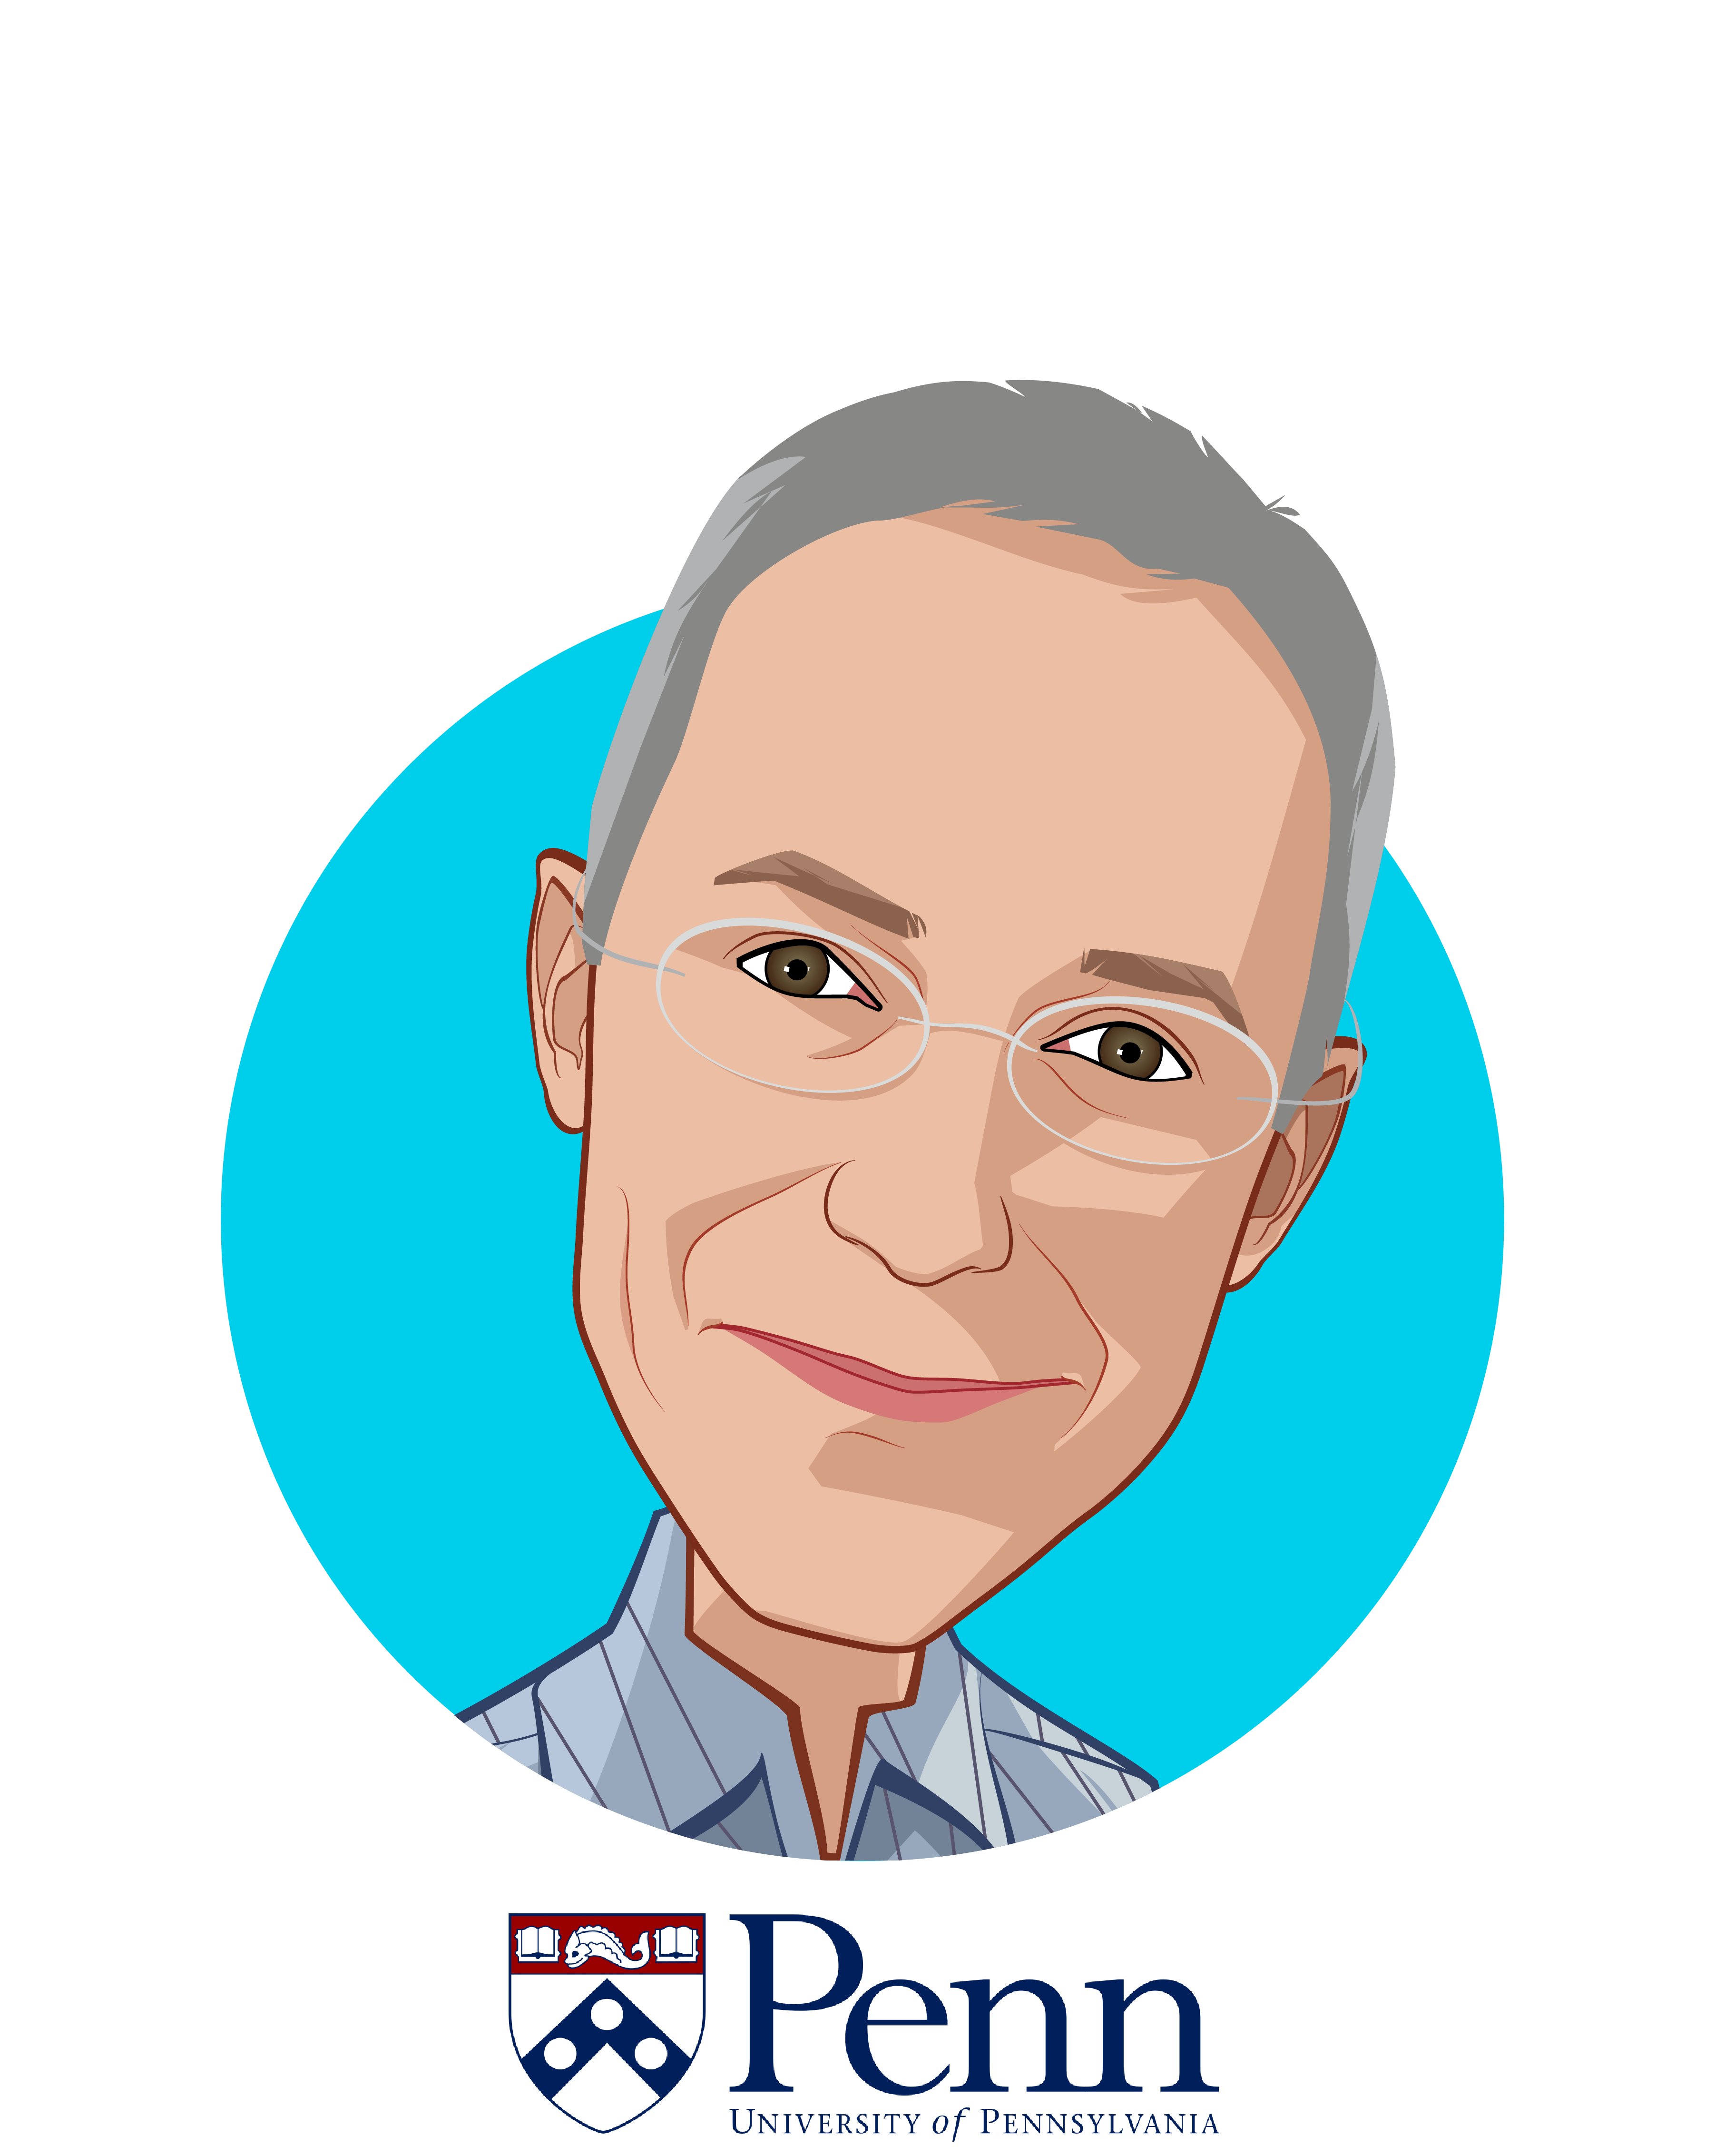 Main caricature of Ezekiel J. Emanuel, M.D., Ph.D., who is speaking at HLTH and is Chair, Department of Medical Ethics and Health Policy at University of Pennsylvania